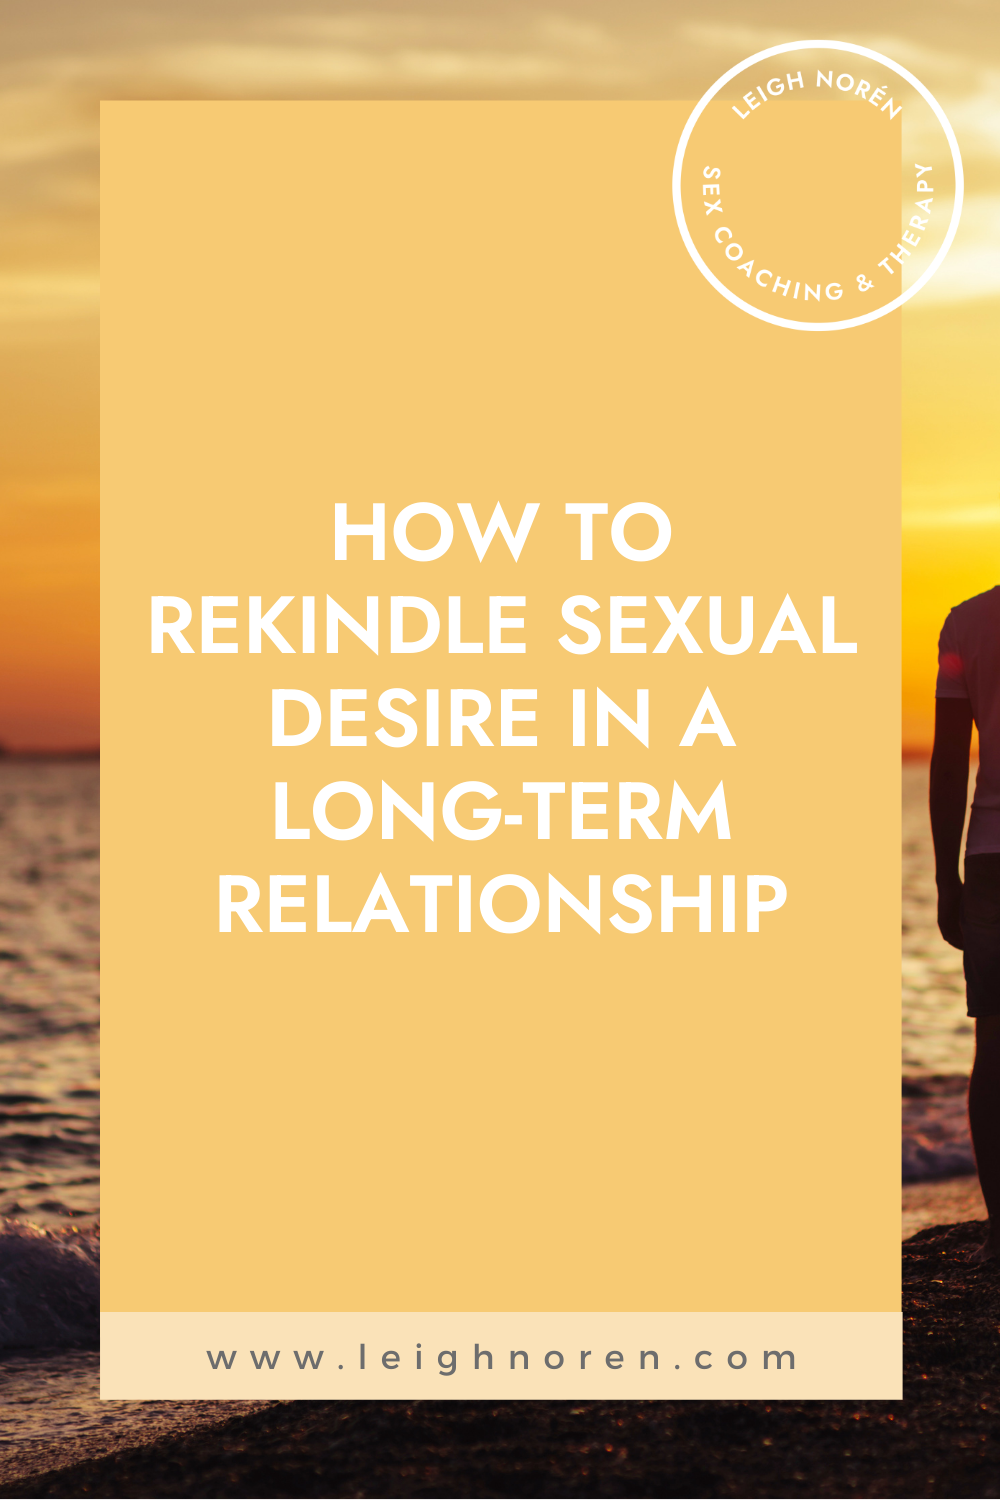 How to Rekindle Sexual Desire in a Long-Term Relationship